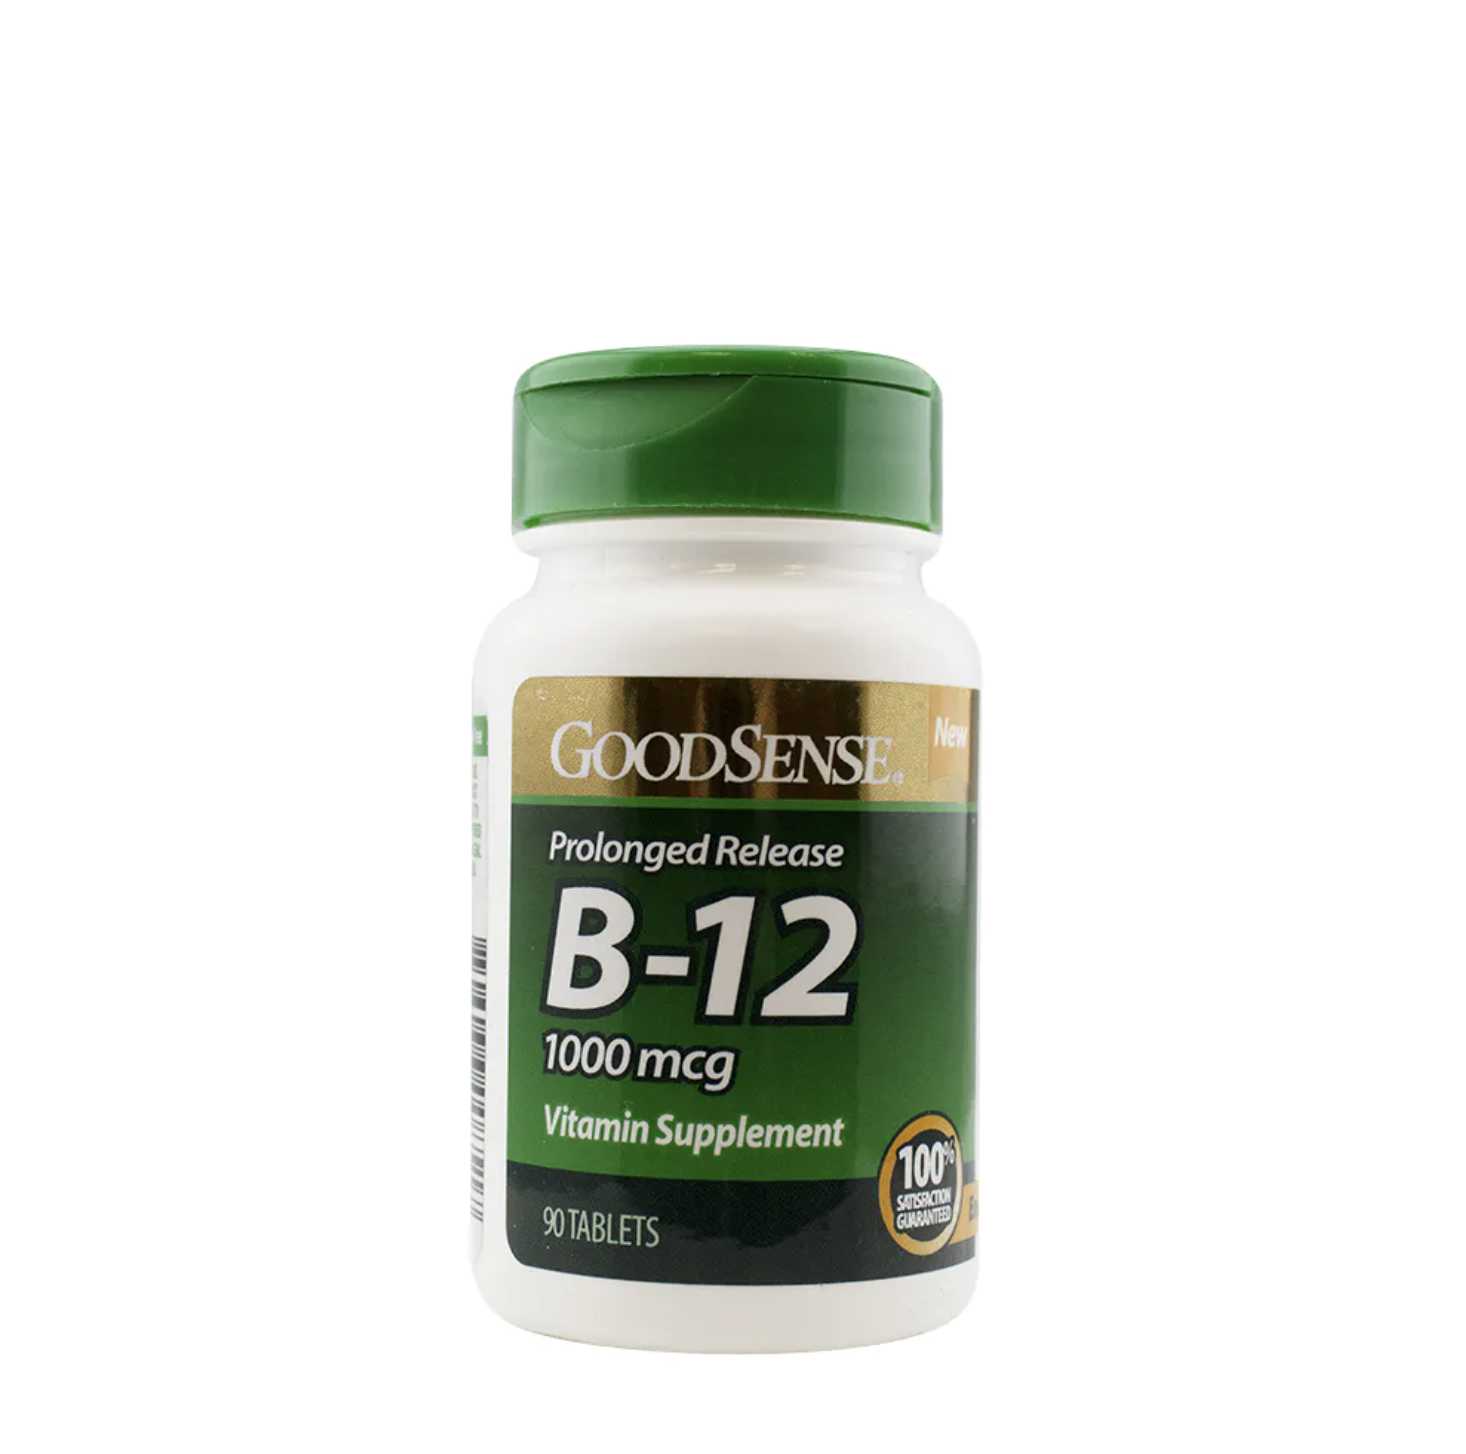 GoodSense B-12 Tablets - 90 Count, Prolonged Release